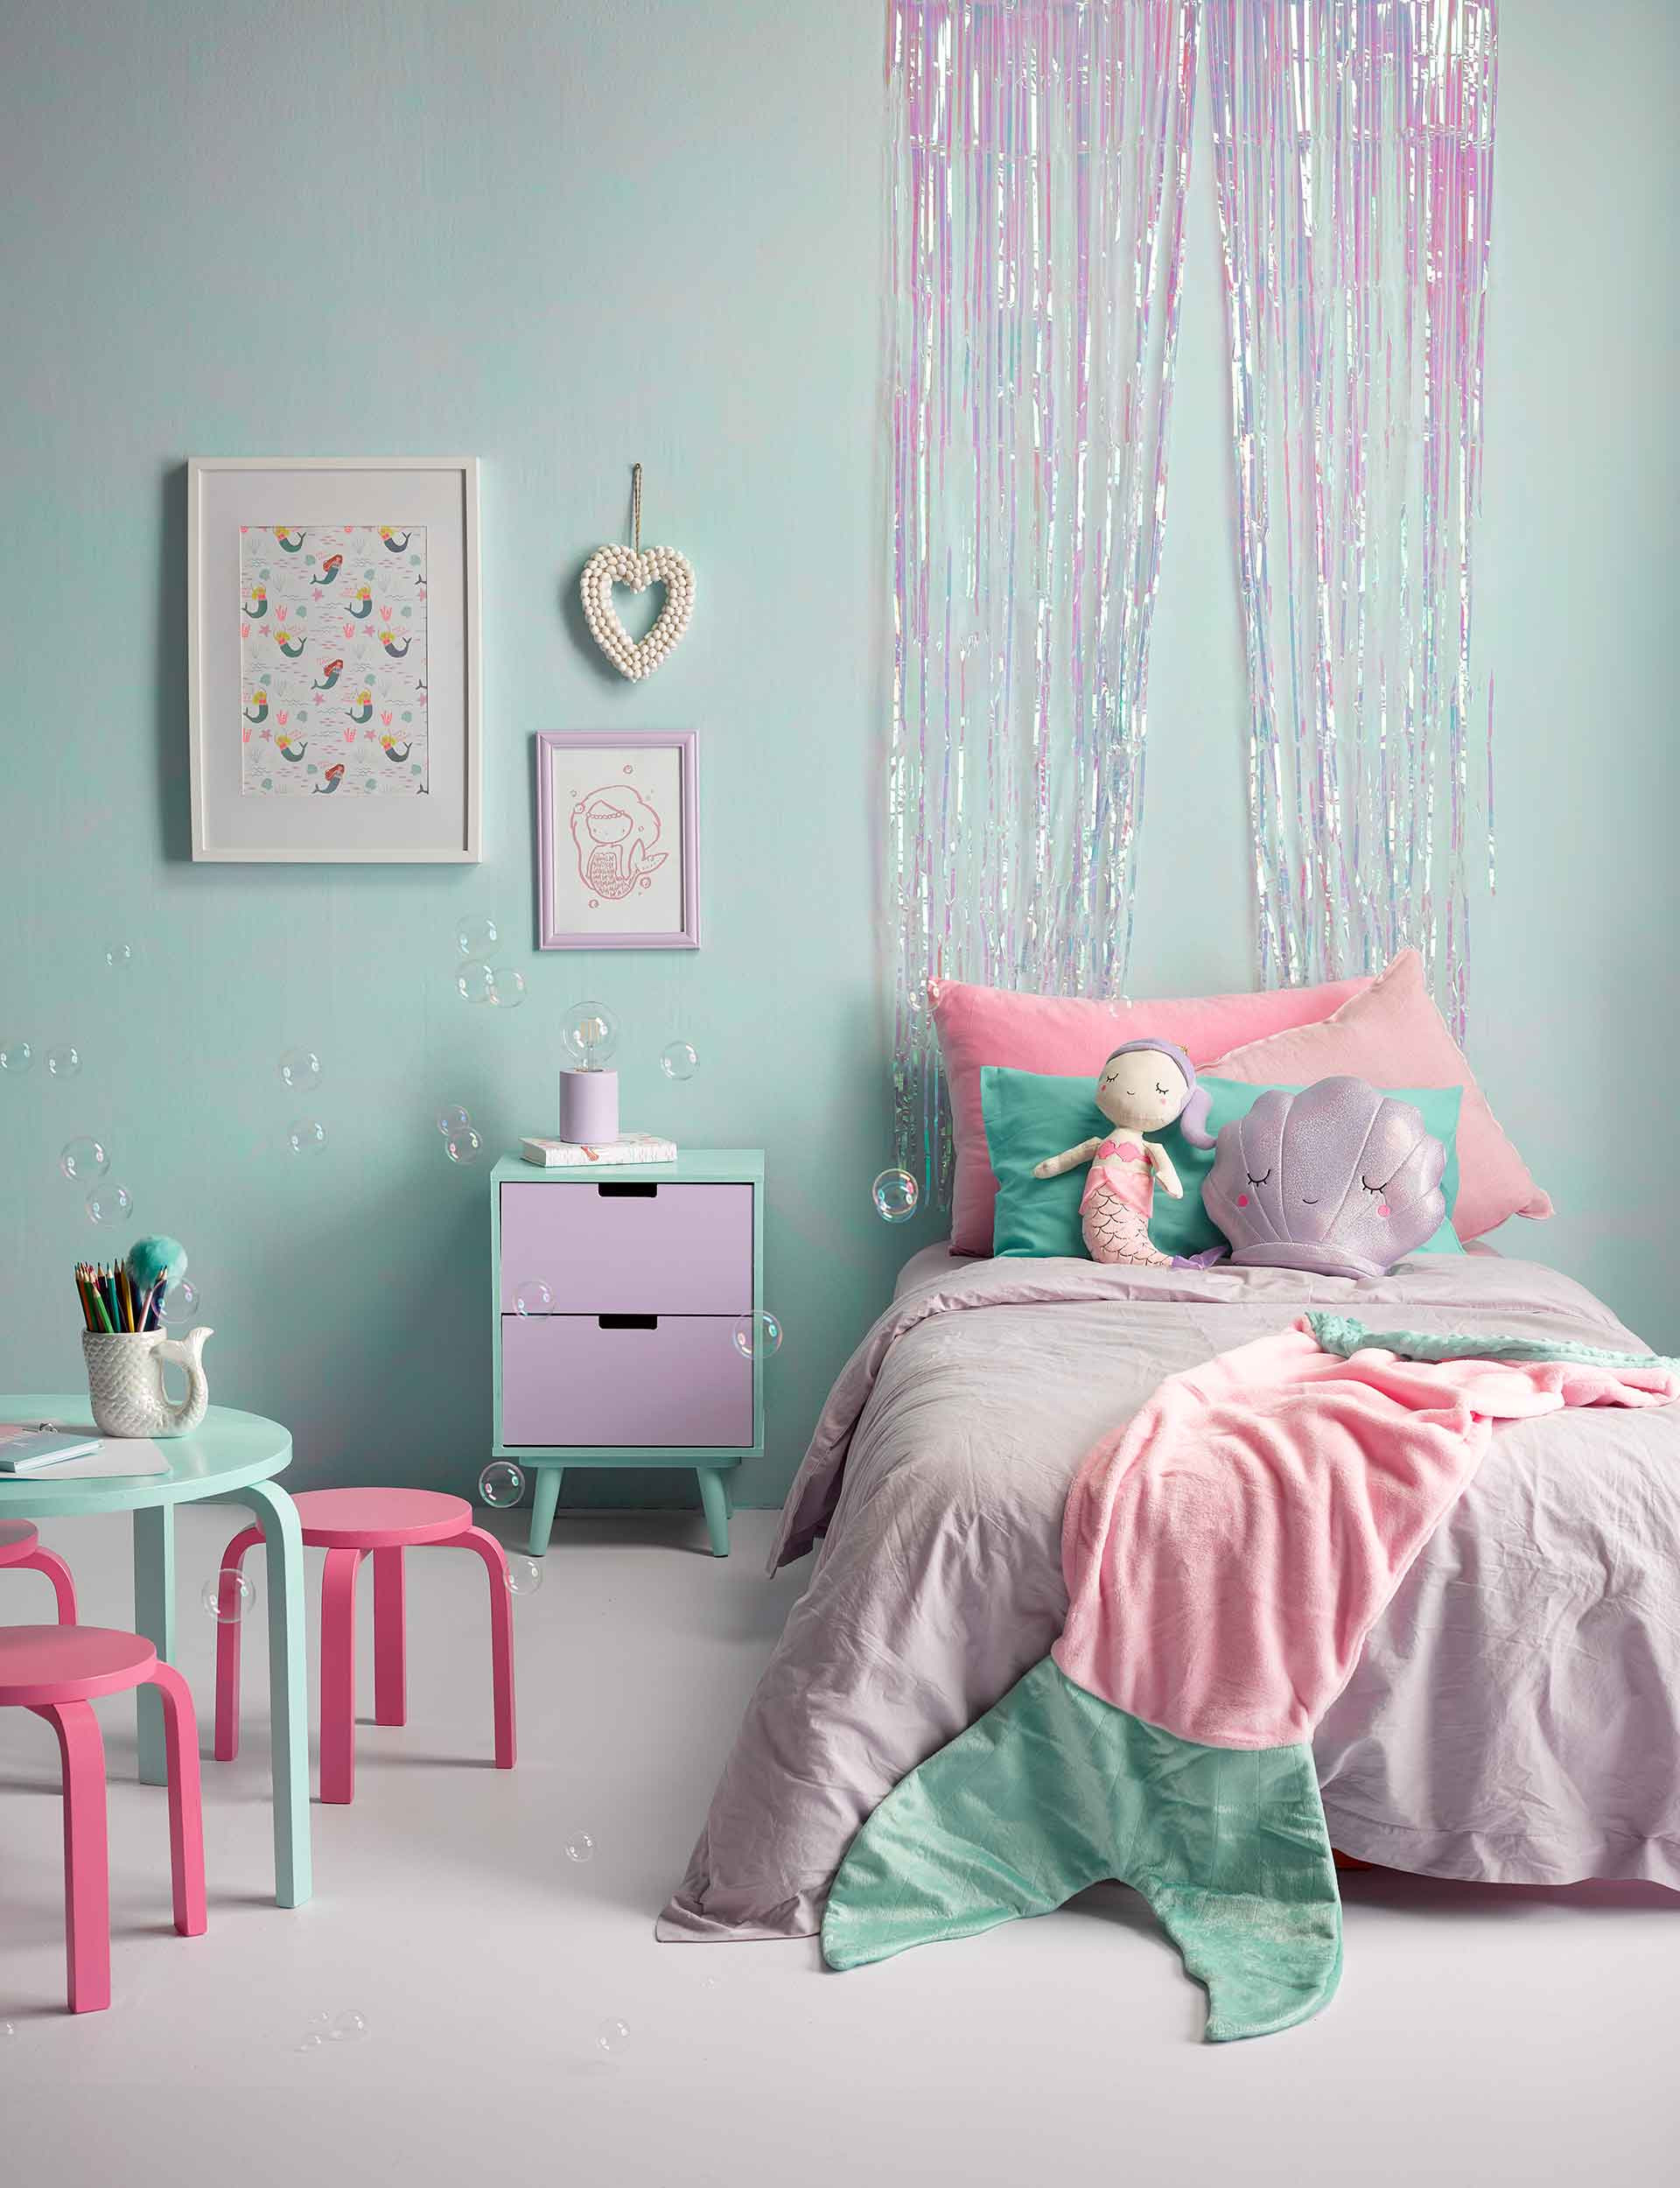 Mermaid Kids Room
 How to give your kid s bedroom a mermaid inspired makeover